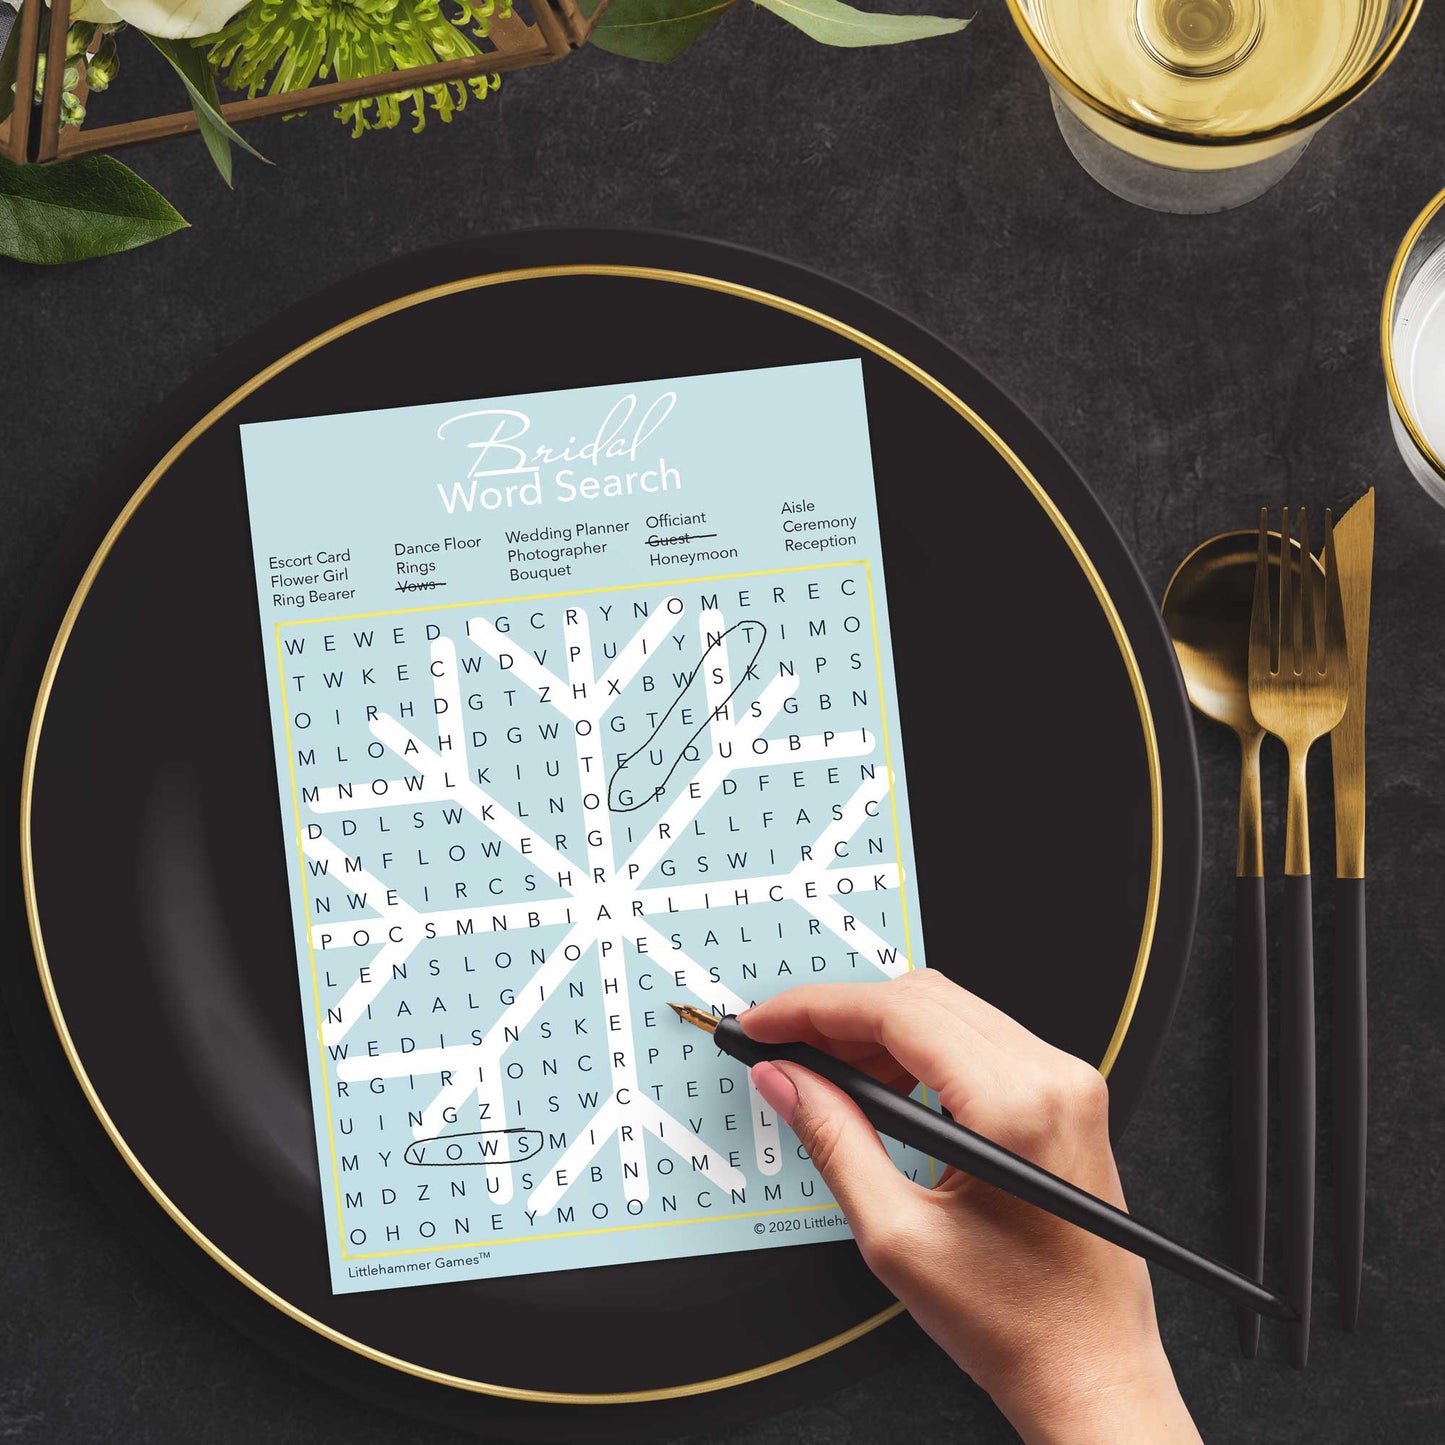 Woman with a pen playing a snowflake Bridal Word Search game card at a dark place setting